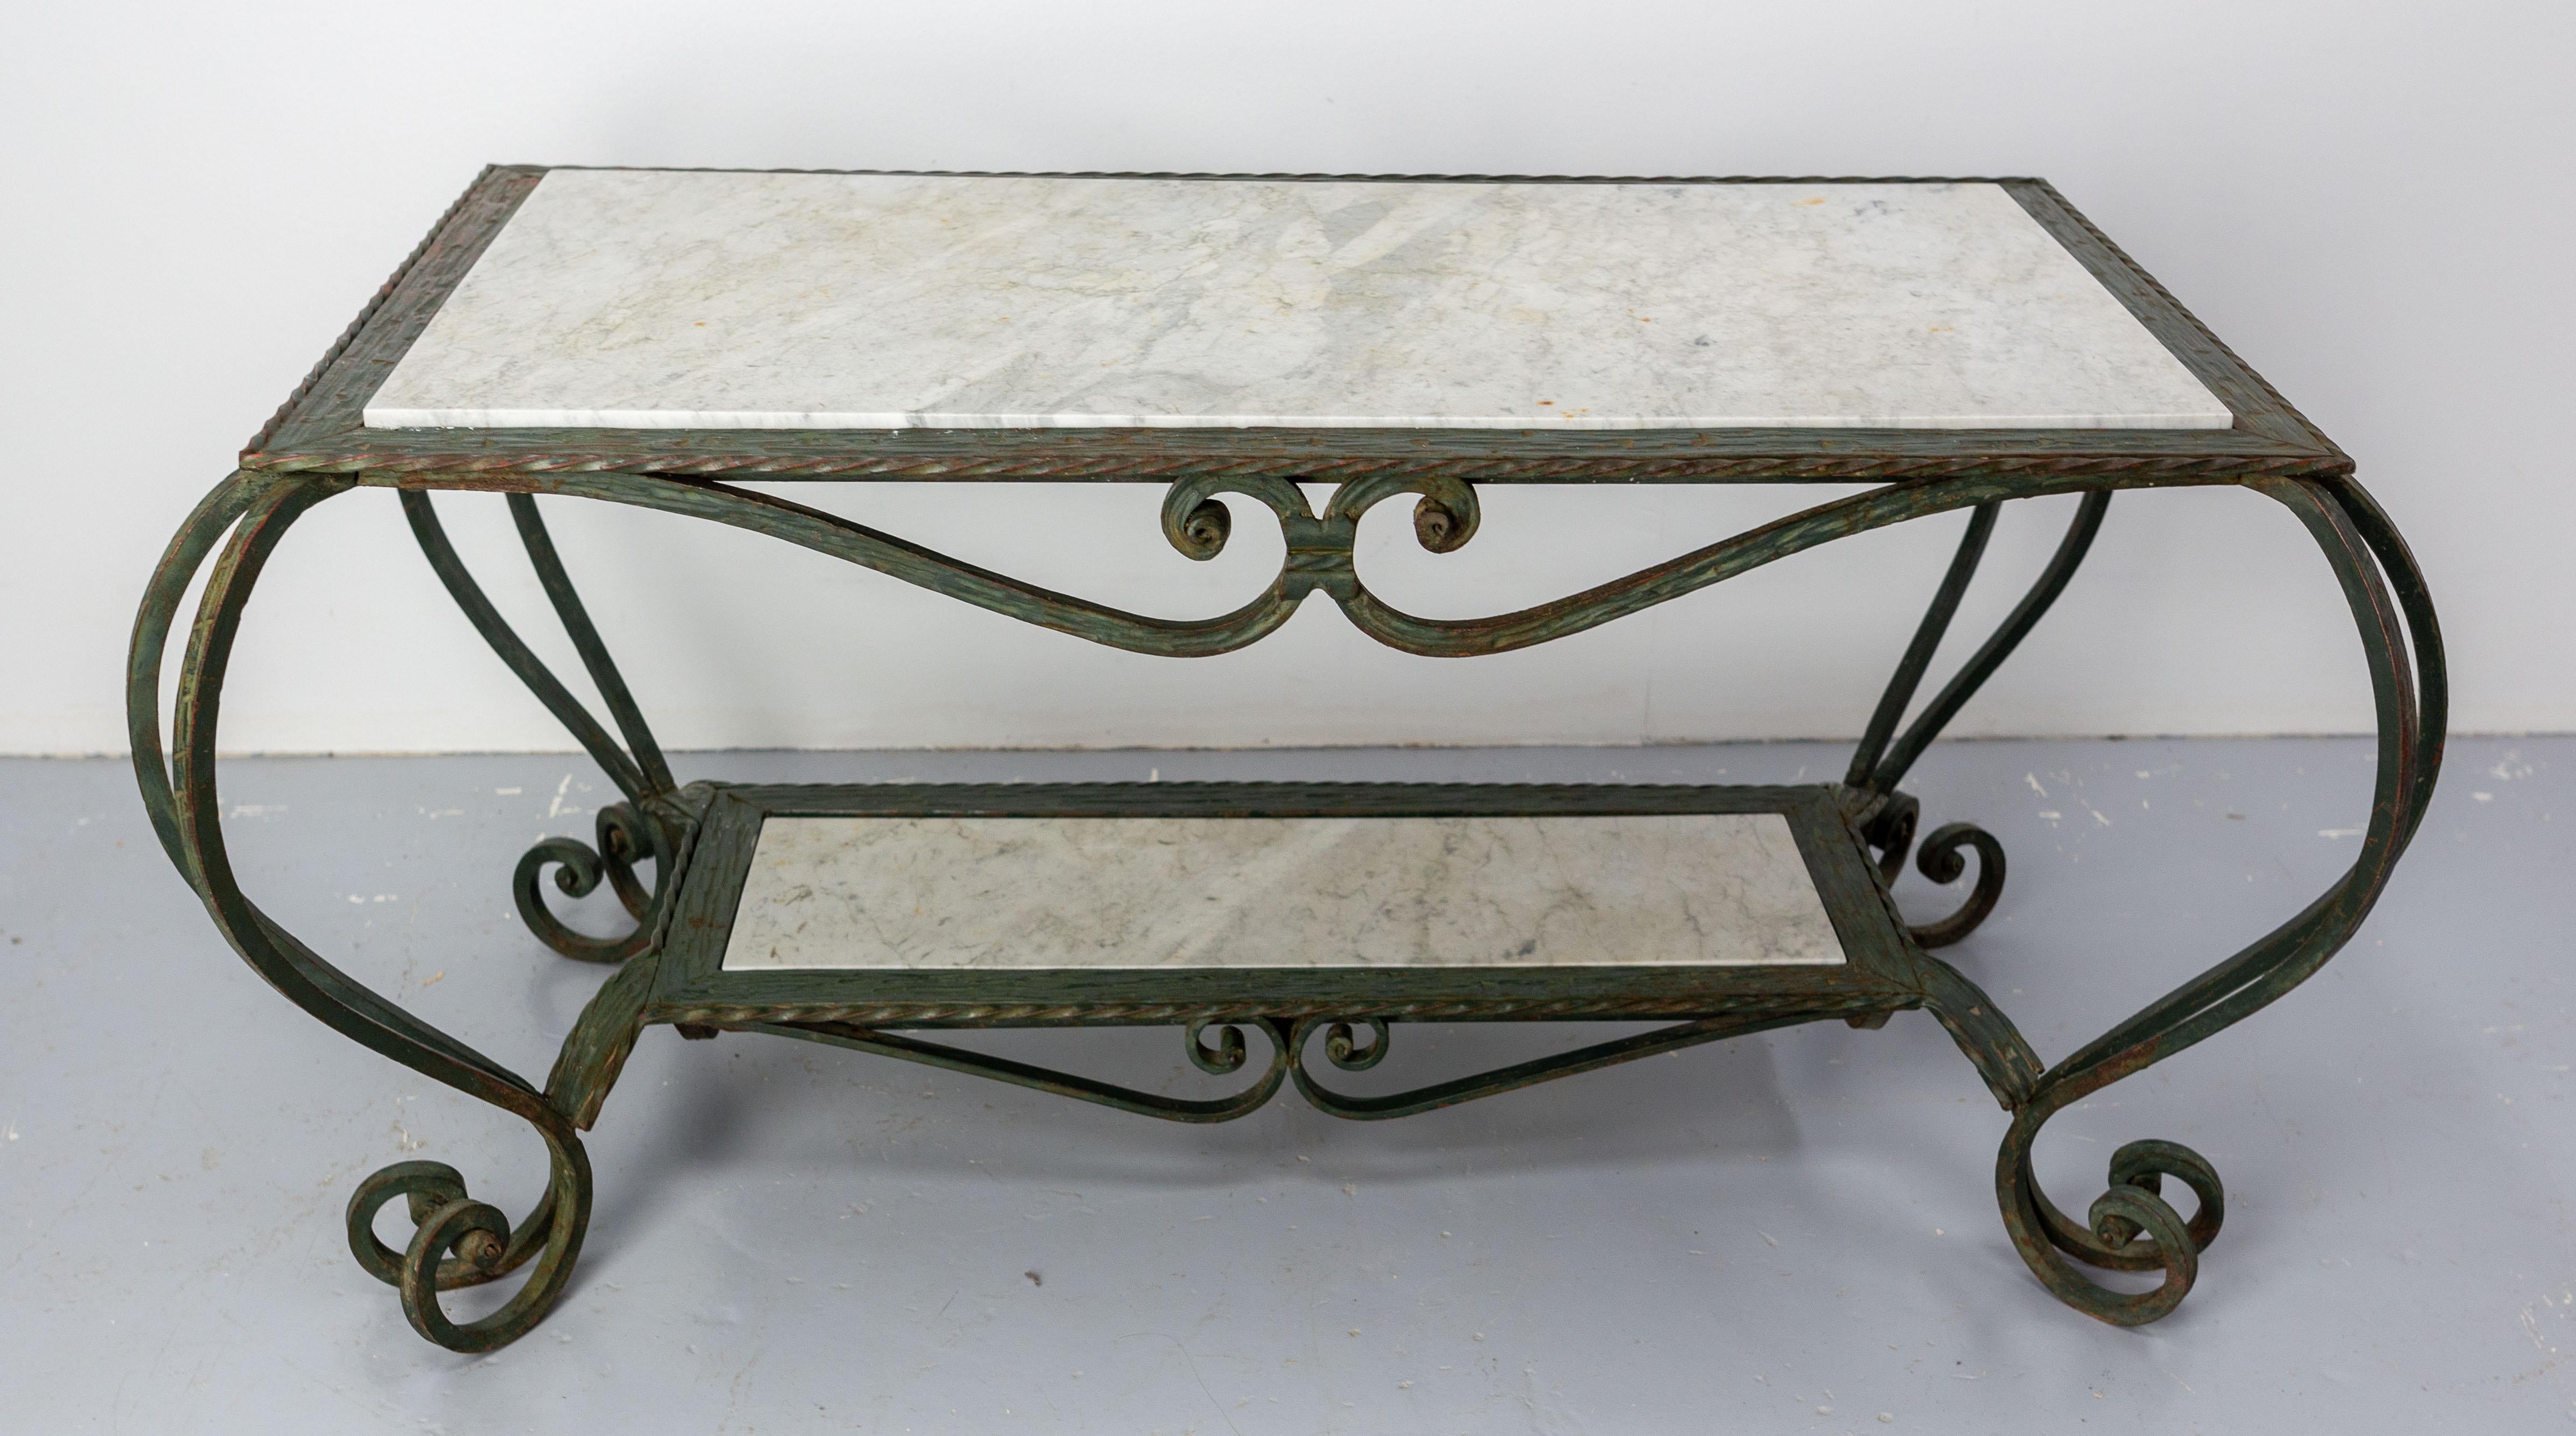 French midcentury coffee table with a marble top and a marble shelf below the top.
Very nice iron work especially for the parts surrounding the marble plates which gives a textured appearance.

In good condition 

Shipping:
 59 / 103 / 48 cm